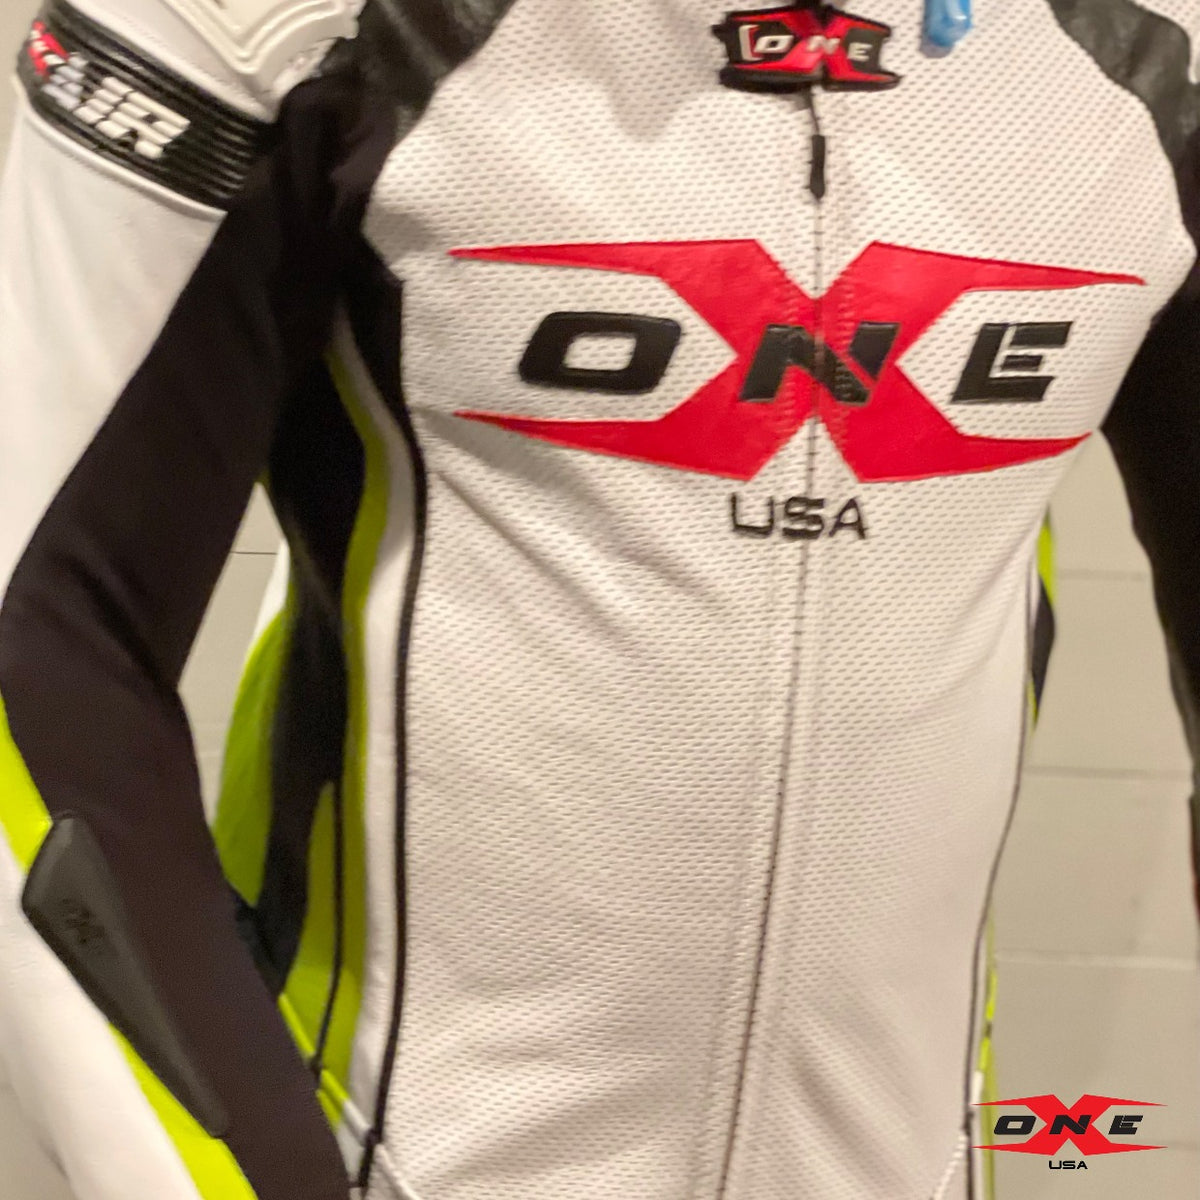 OneX USA Airbag Ready Pro Race Suit - Yellow